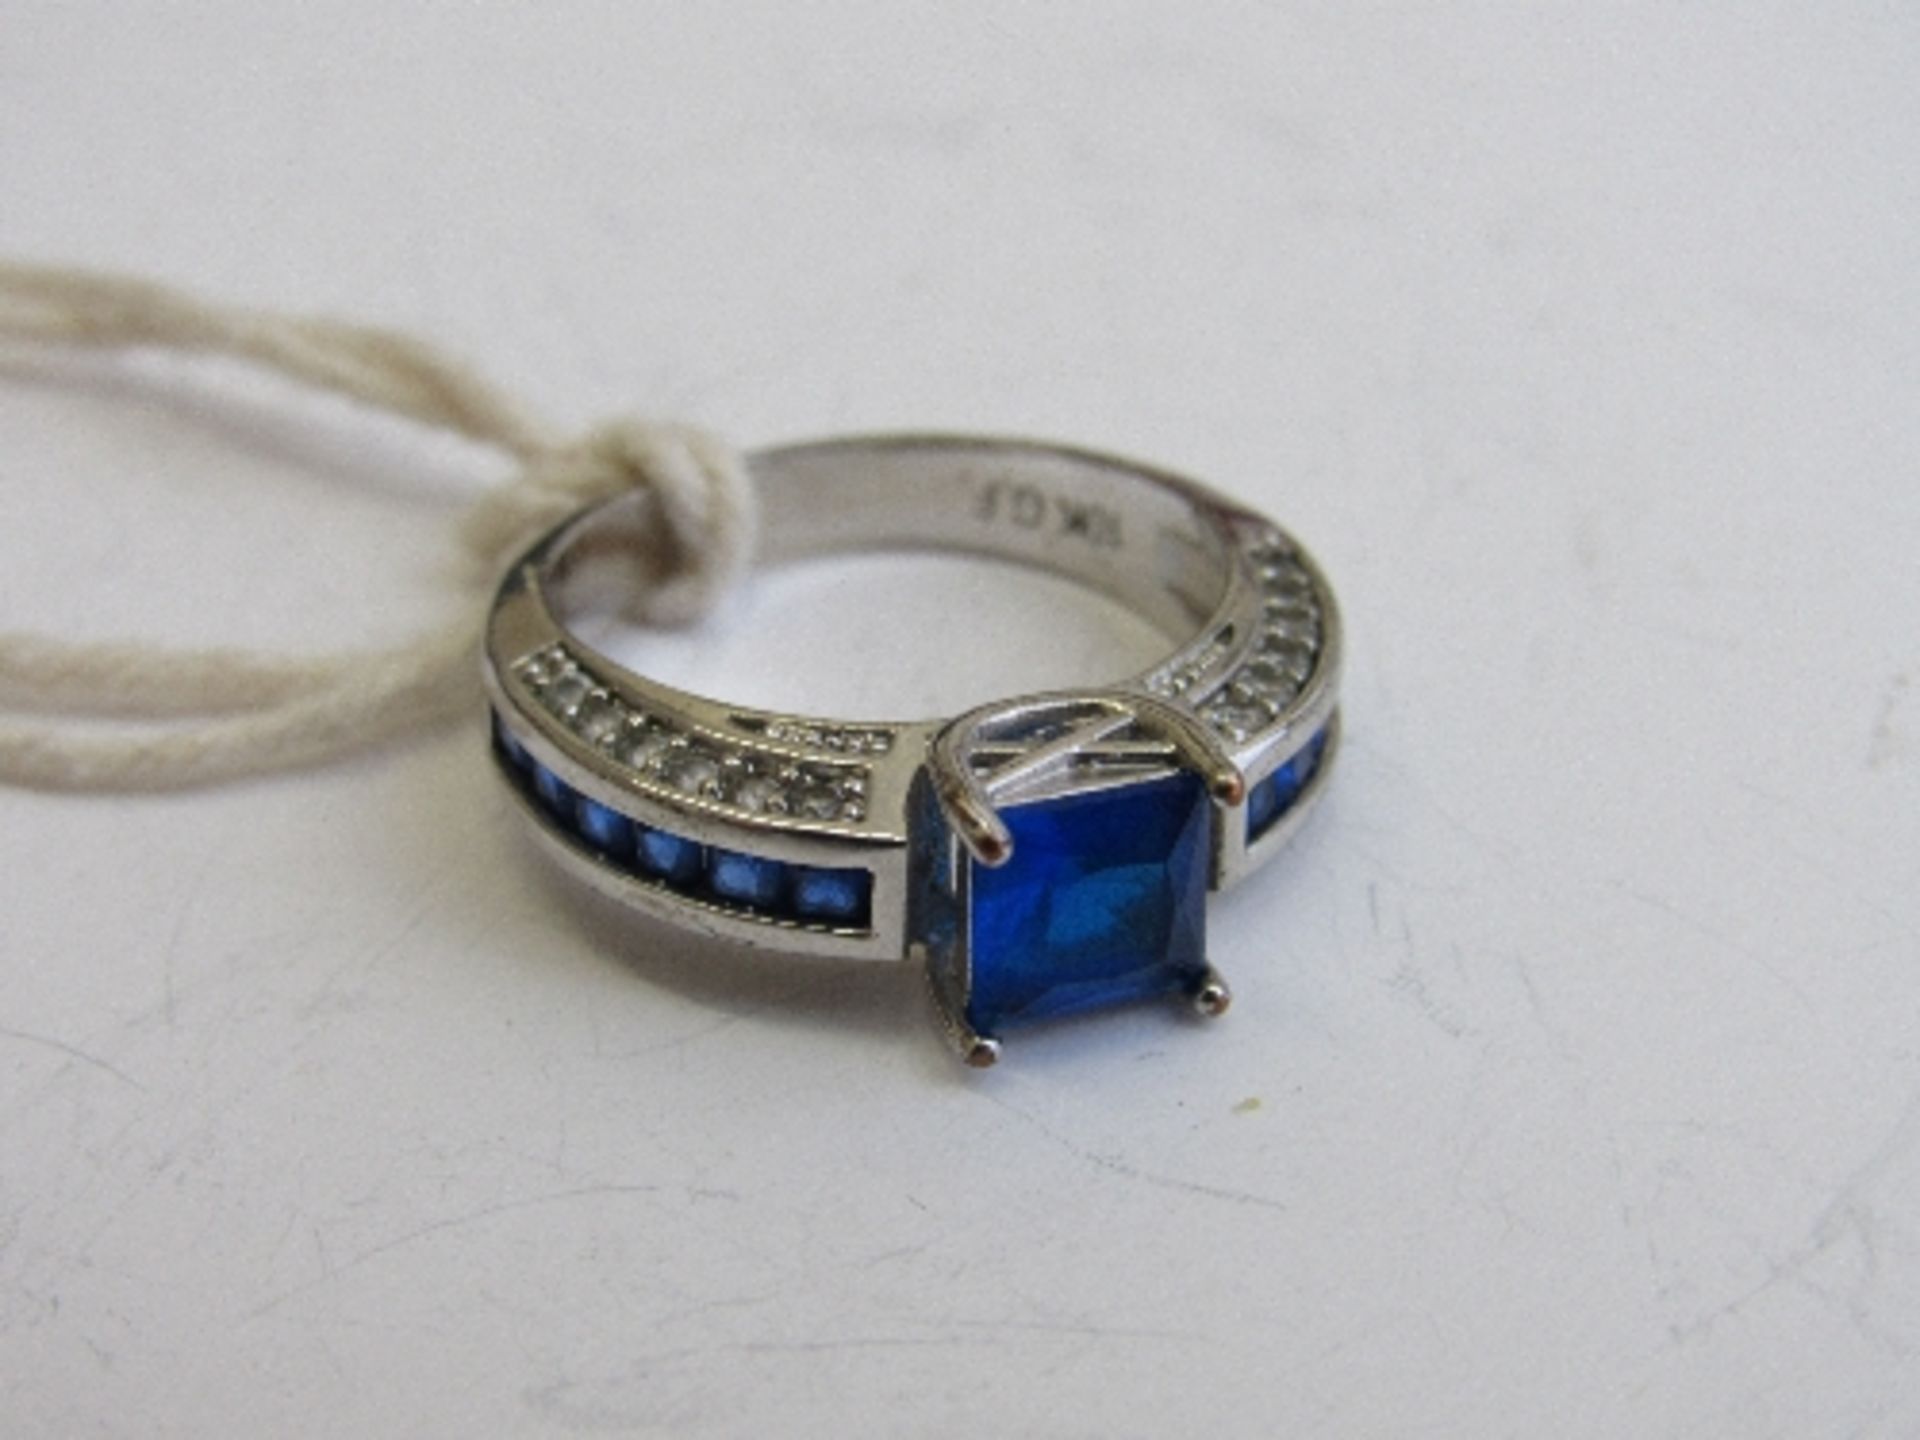 10ct white gold with blue stone ring, size P, weight 4.7gms. Estimate £50-60.